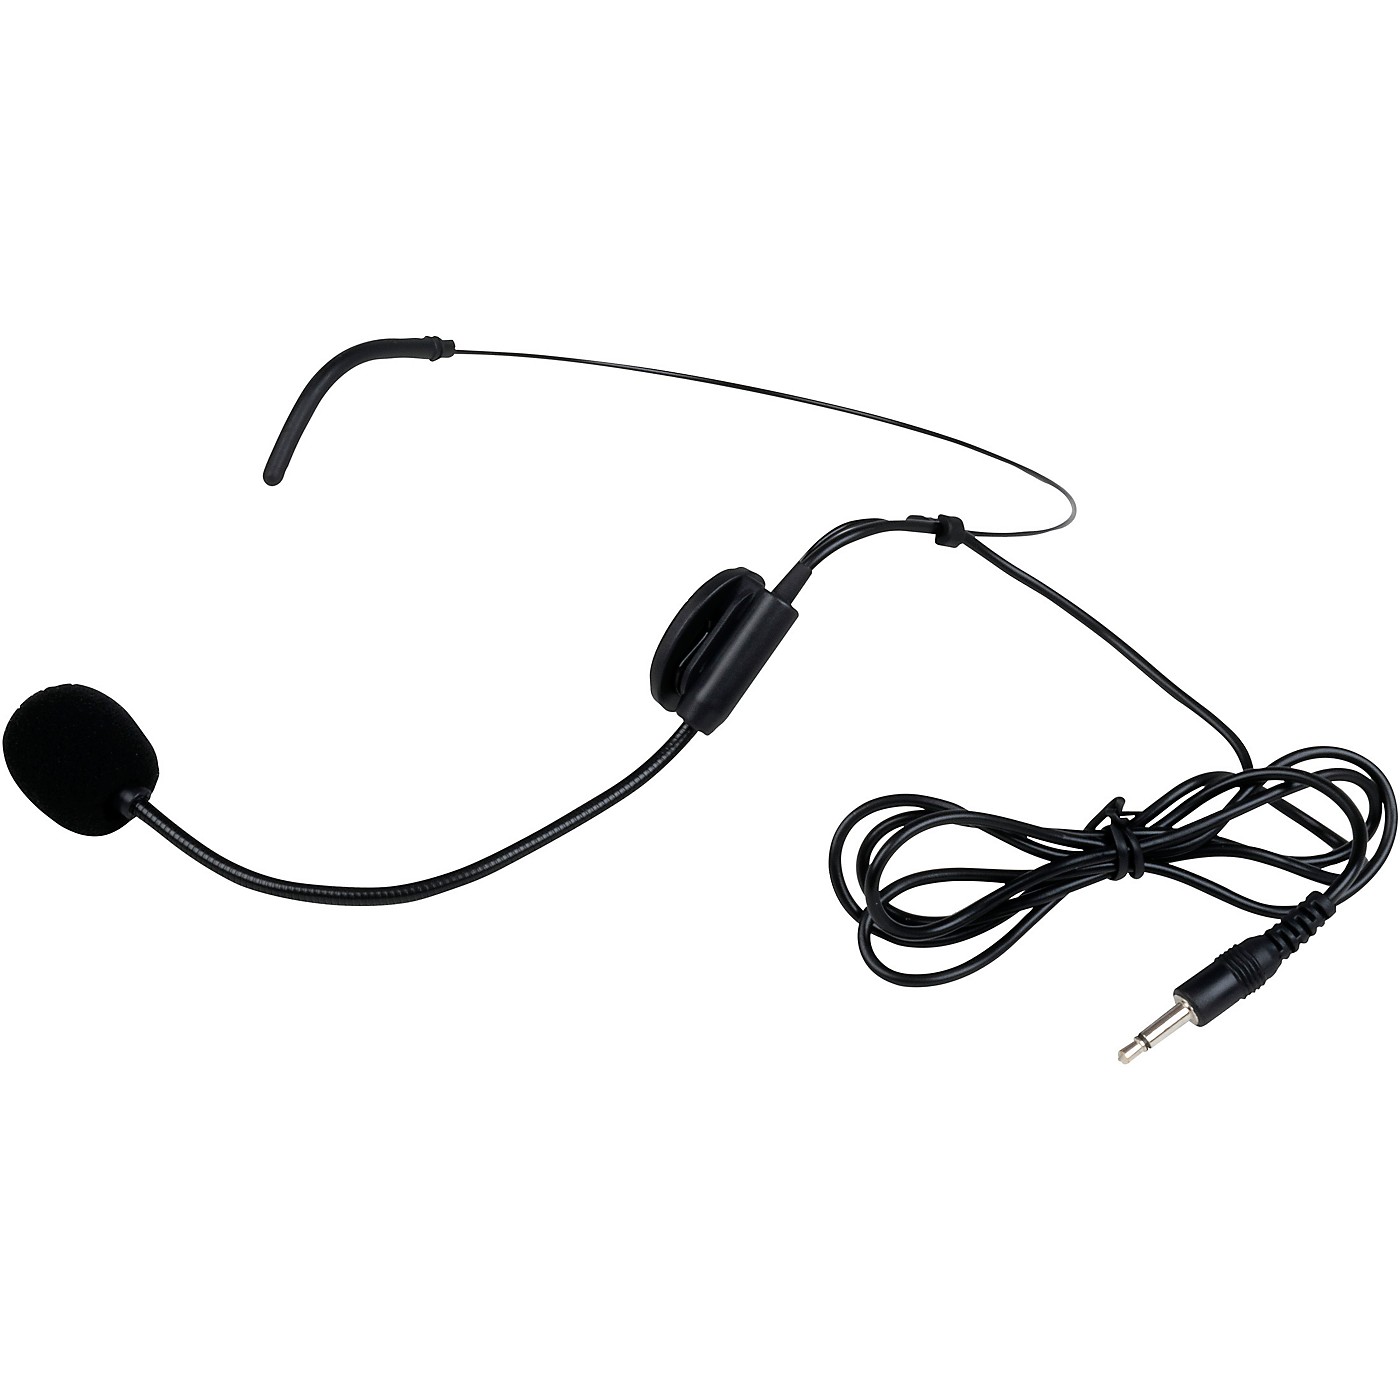 Vocopro Commander-Film-Headset1 Wireless UHF Headset Mic System for Digital Video Cameras Frequency Set 1 thumbnail